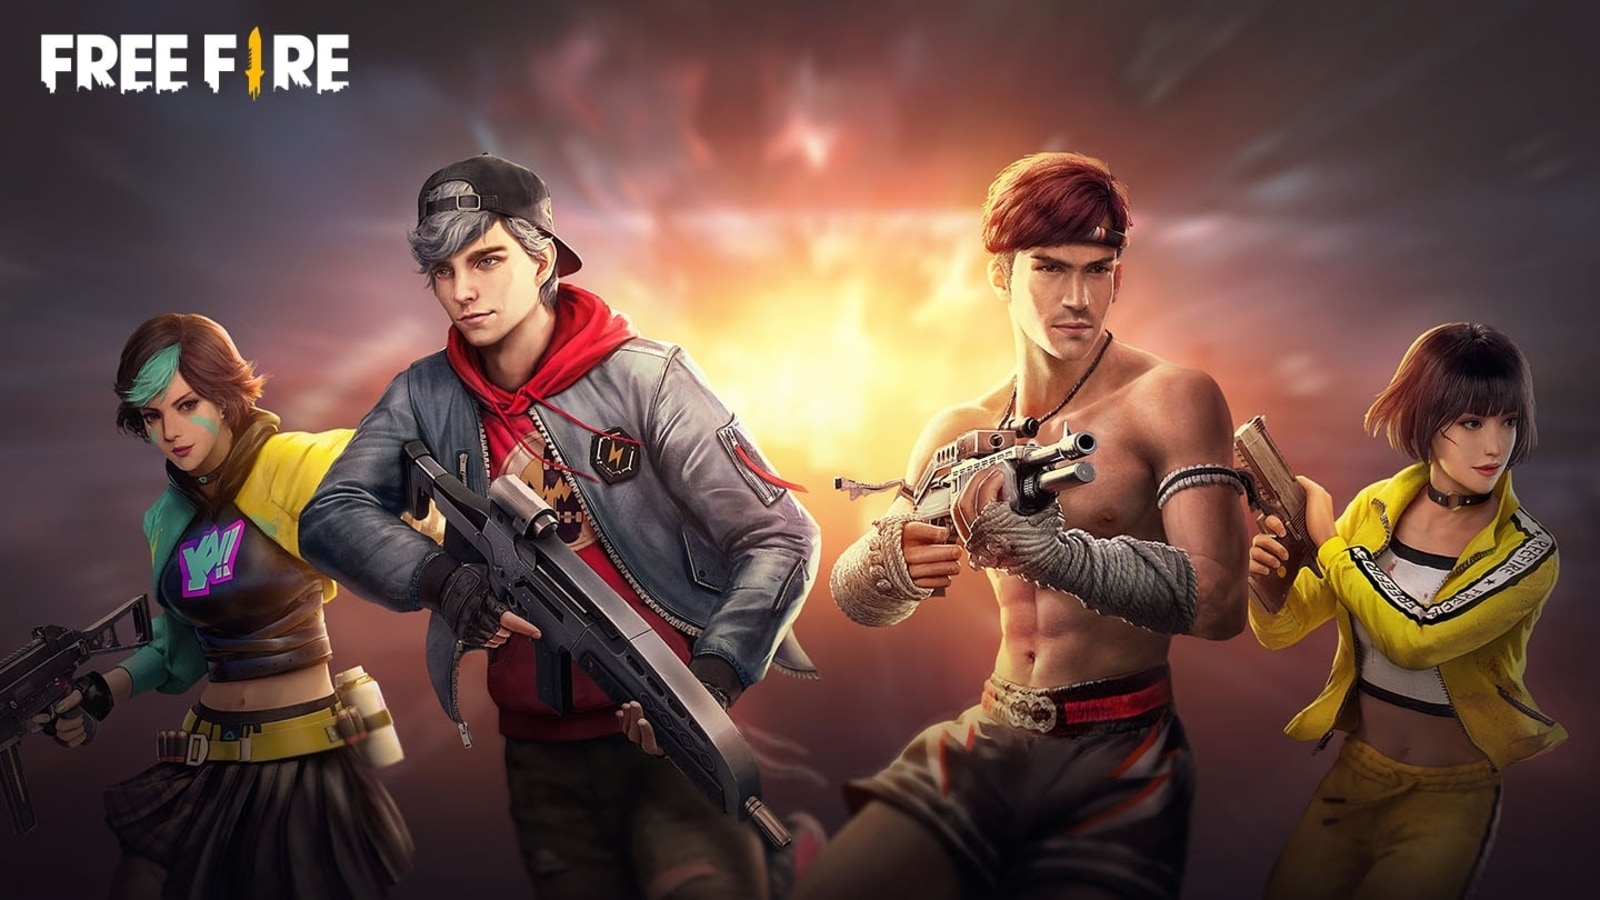 Garena Free Fire Redeem Codes for October 14: Get amazing rewards with the  Unicorn Ring Luck Royale event